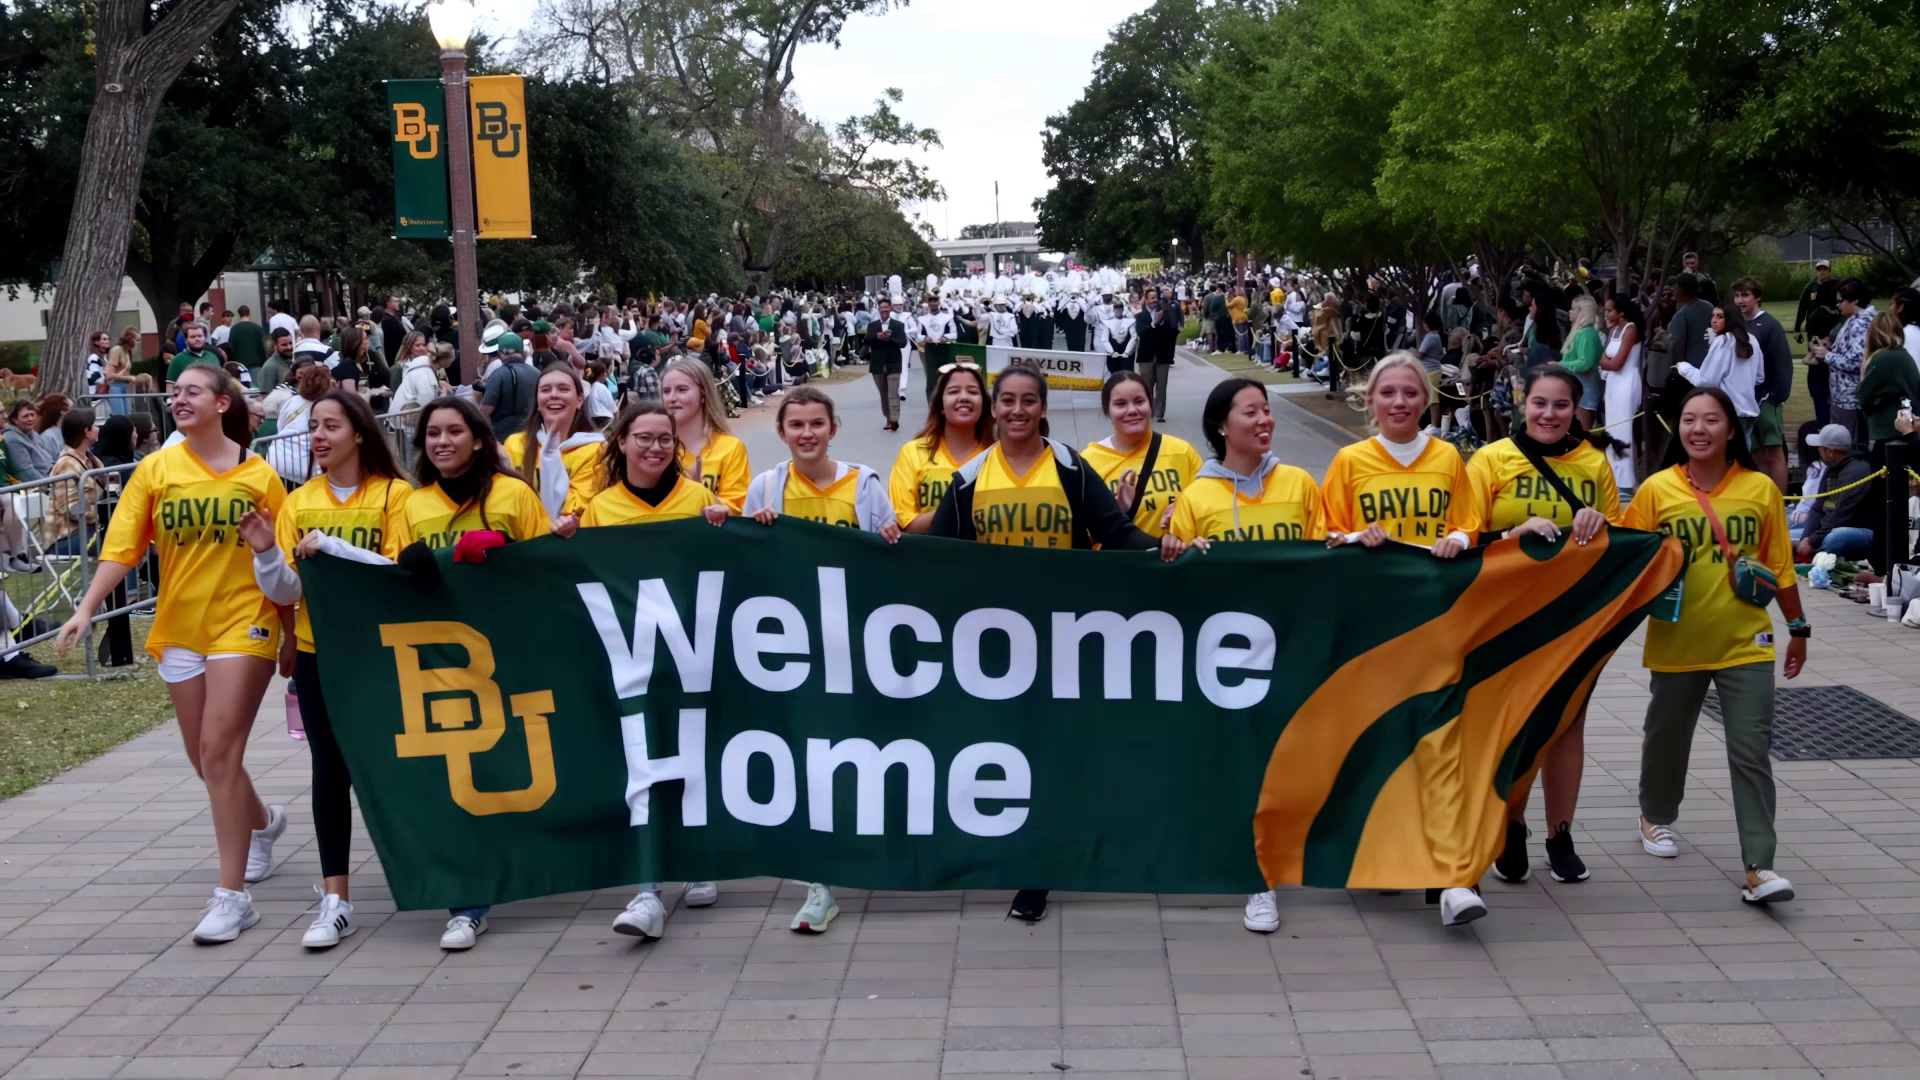 Baylor University Homecoming parade with banner and happy students